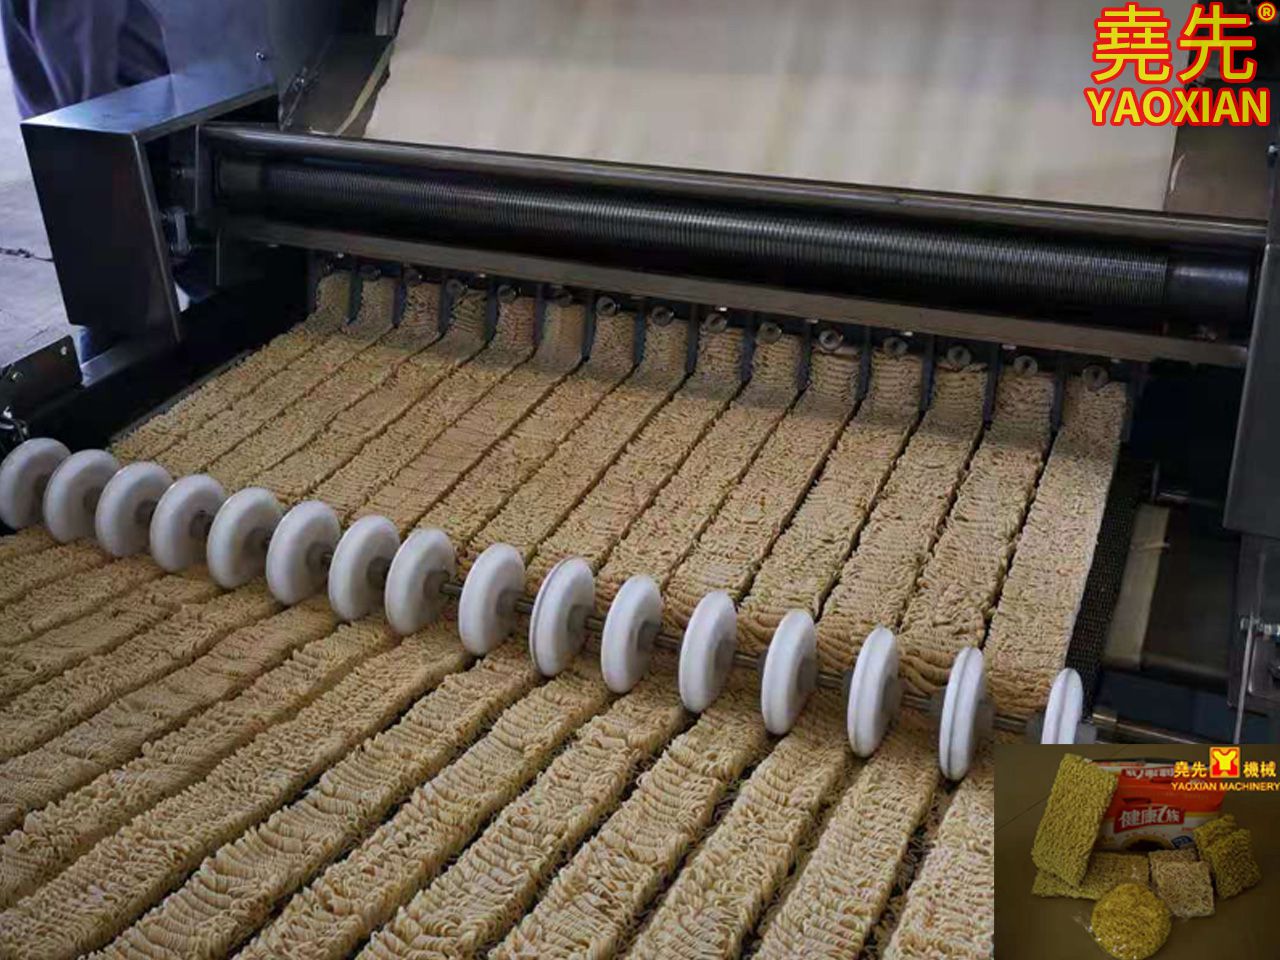 The automatic noodle machine is also suitable for the production of cereals and cereals noodles